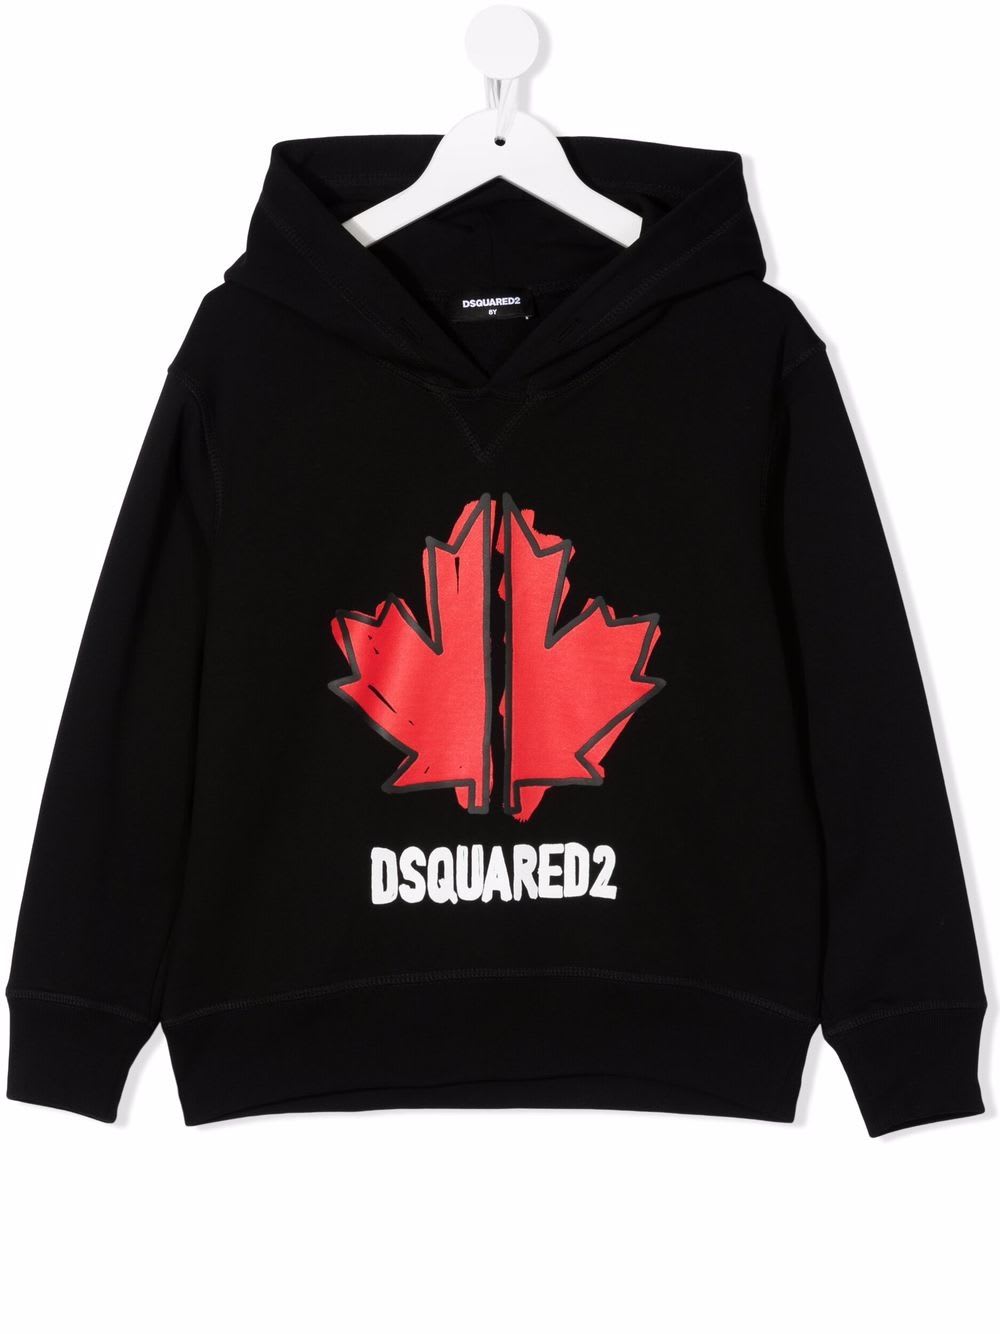 Dsquared2 Kids Black Hoodie With Front And Back Sport Edtn.05 Print